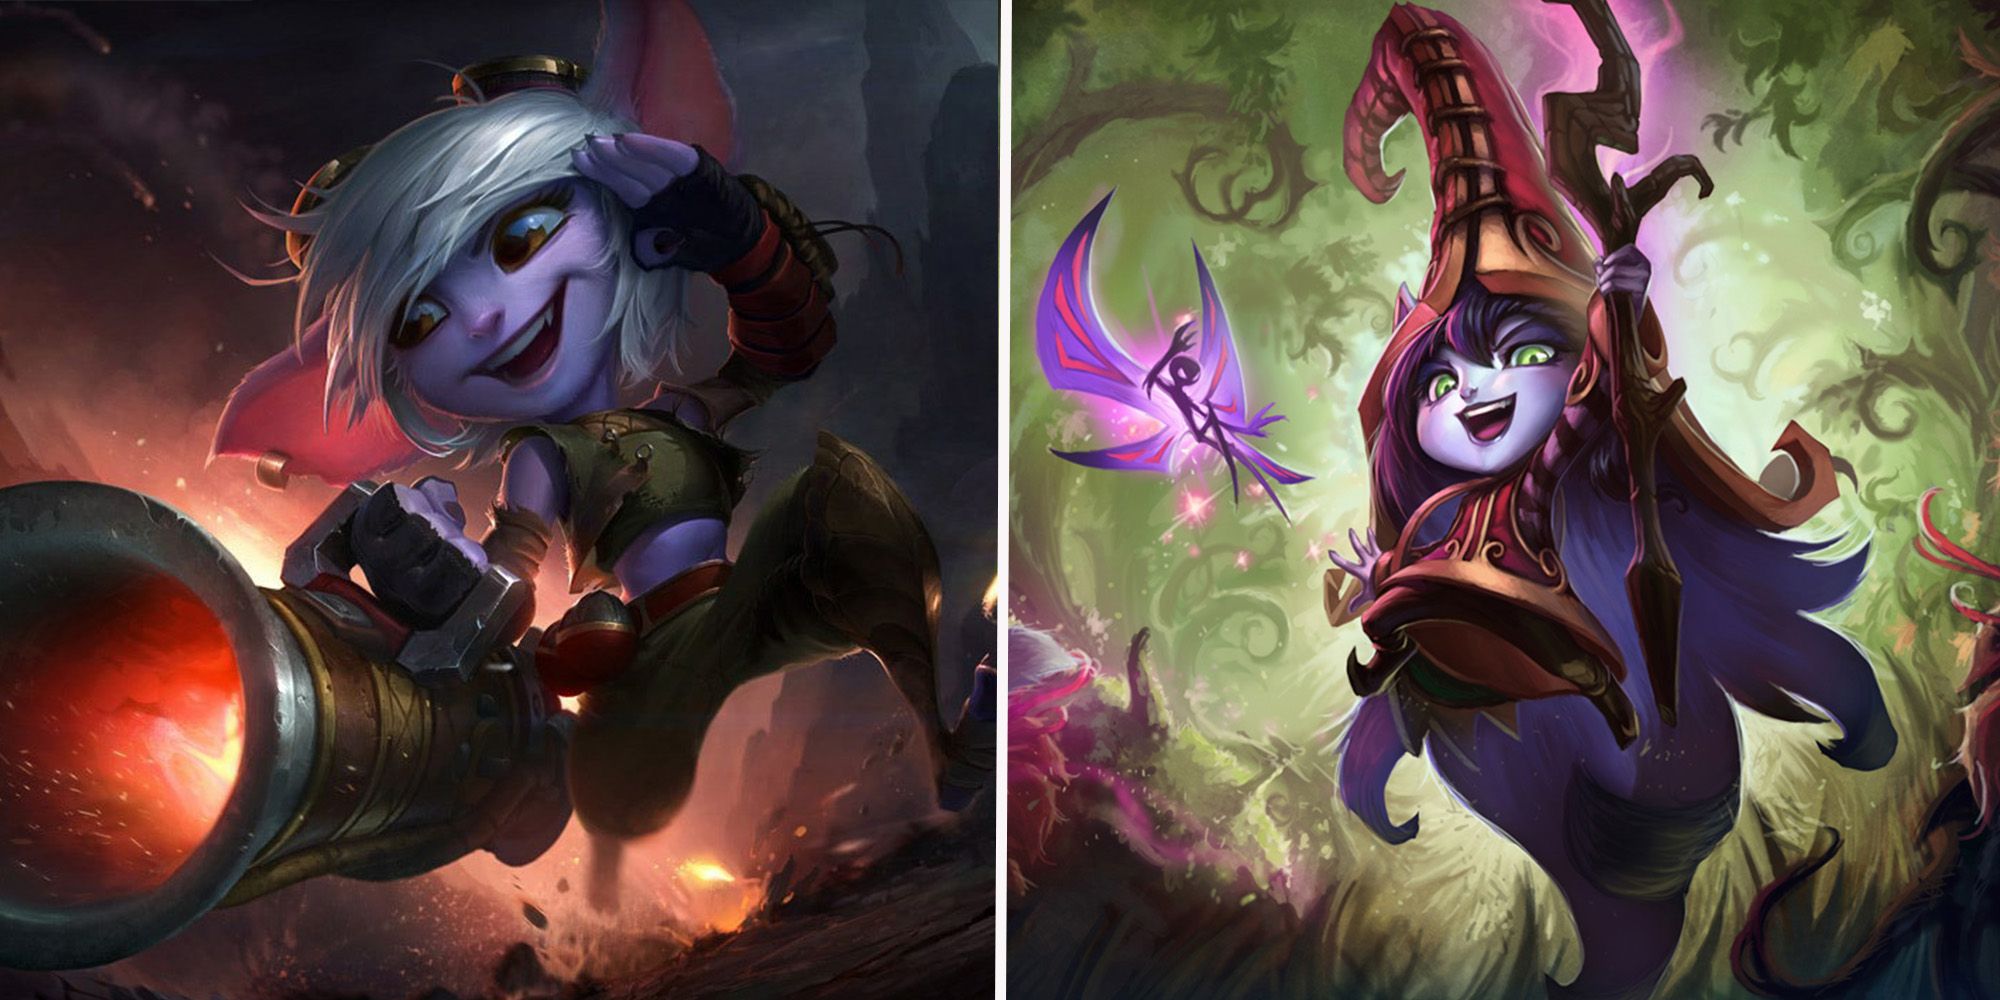 Lulu and Tristana from League of Legends